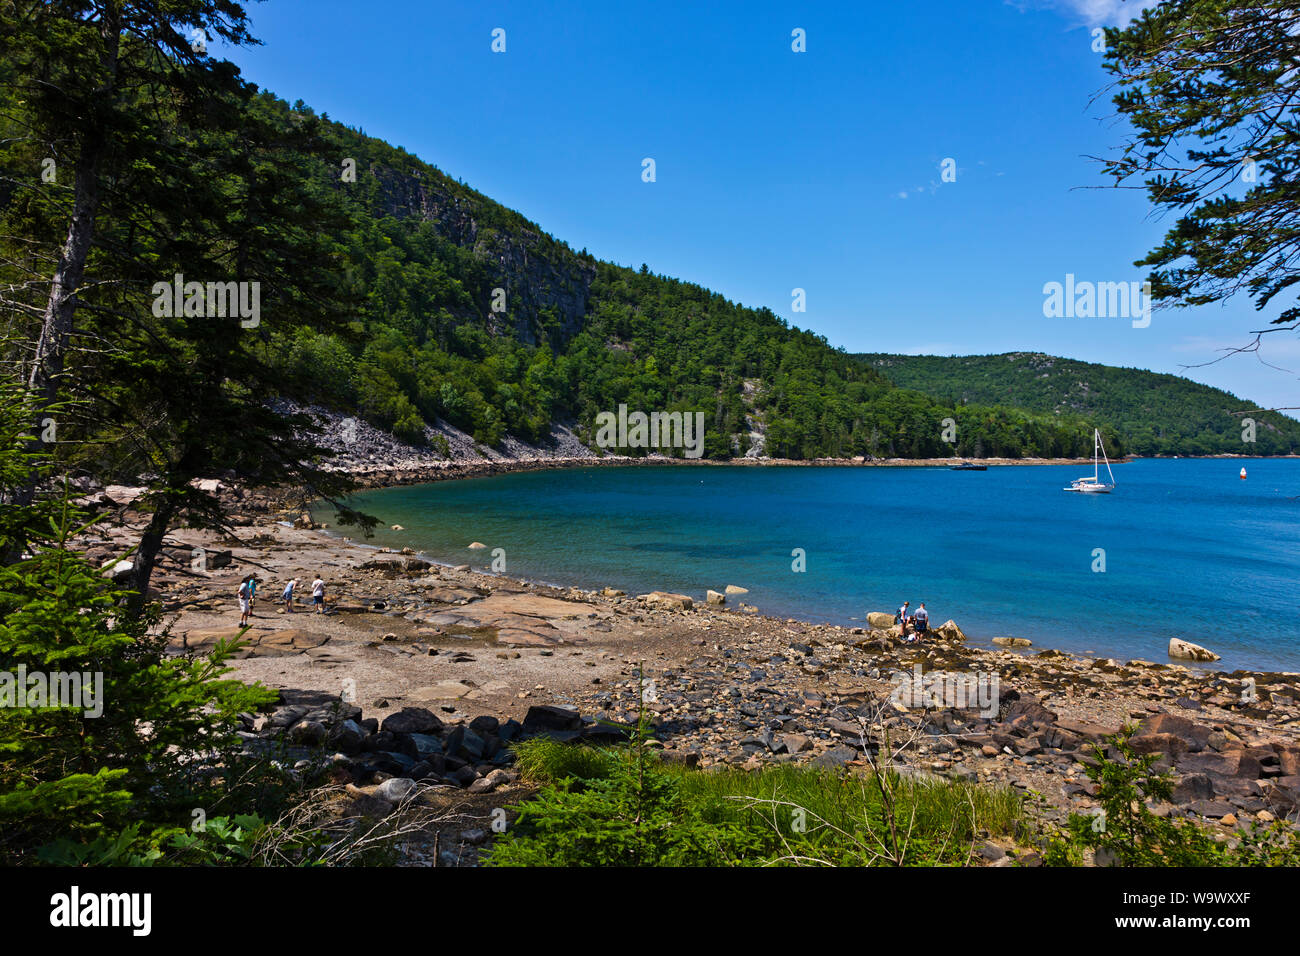 View from  hike up a hill on DESERT ISLAND - ACADIA NATIONAL PARK, MAINE Stock Photo